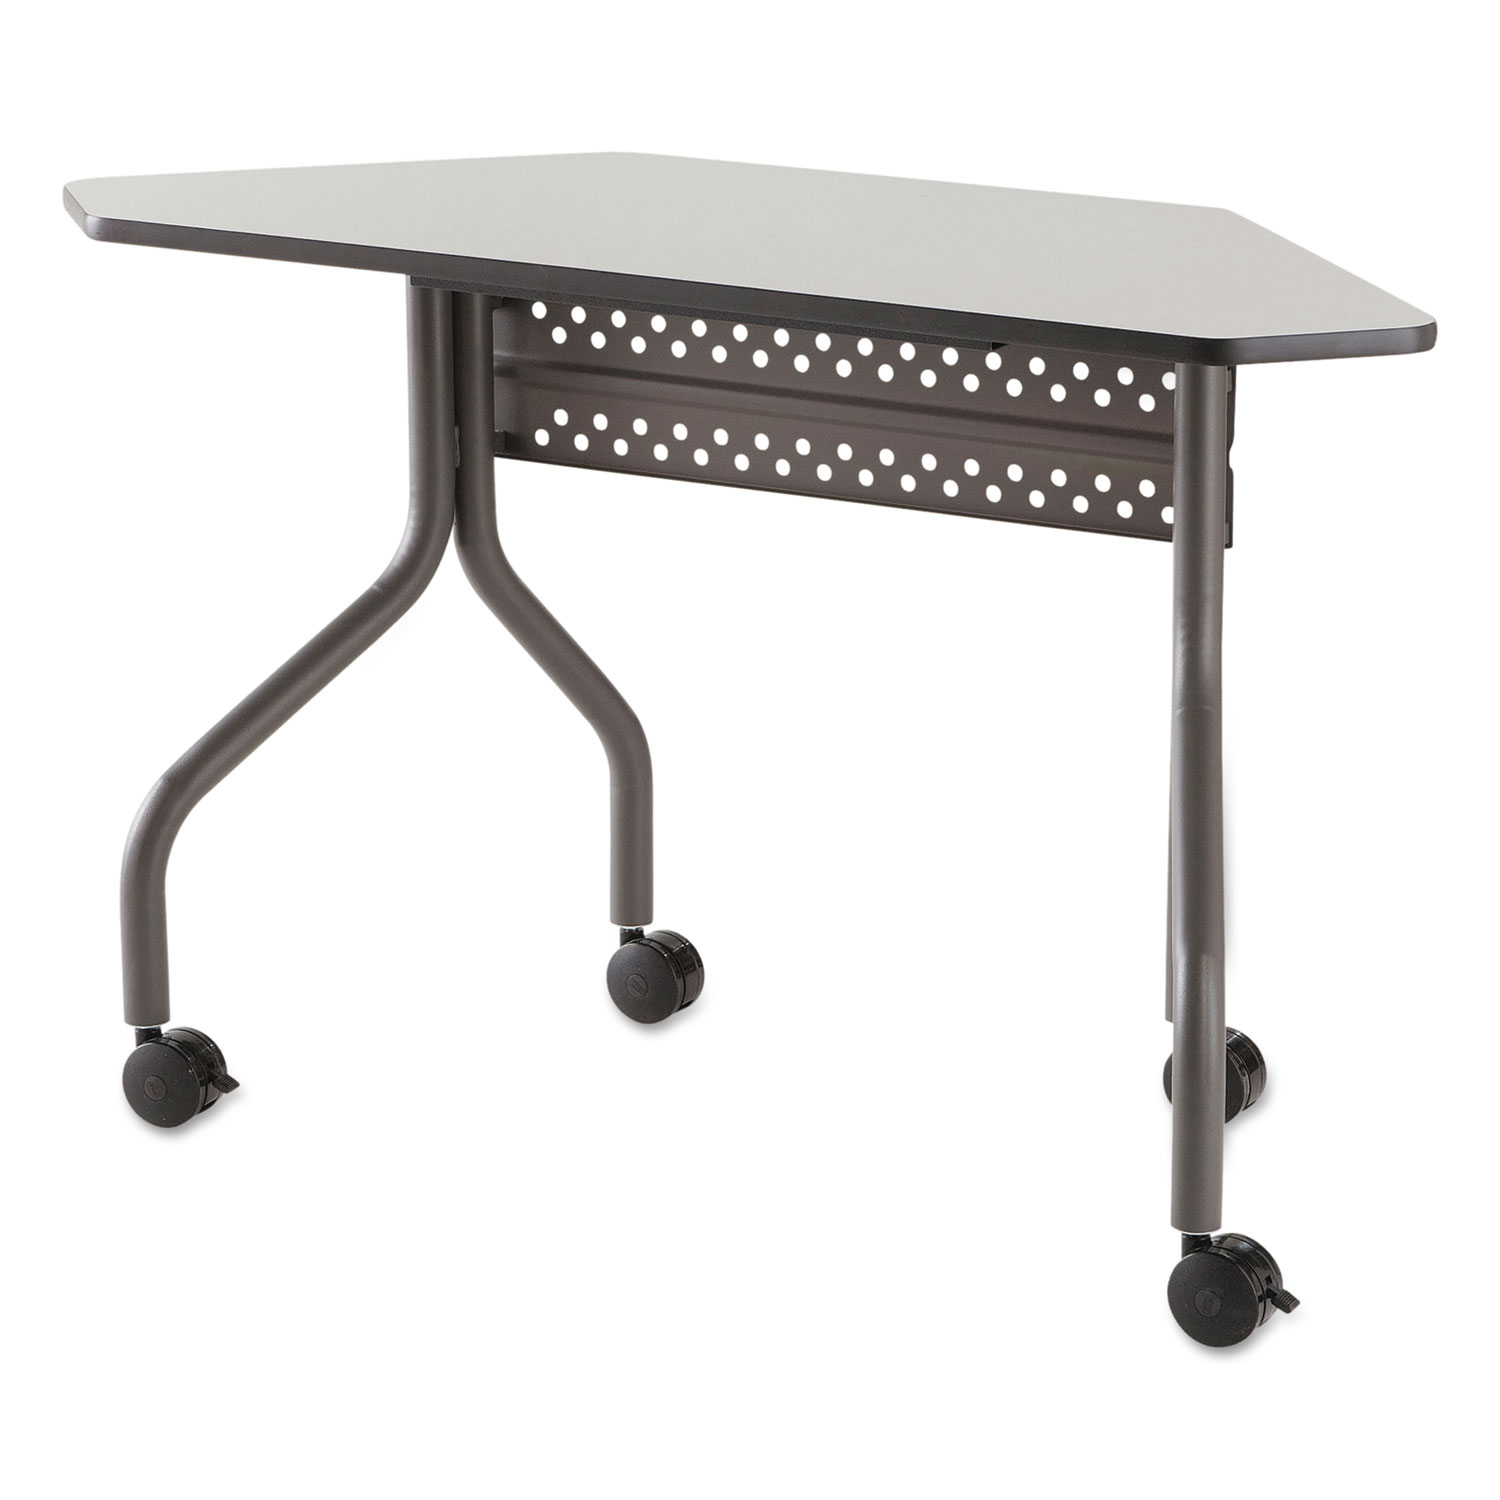 OfficeWorks Mobile Training Table, Trapezoid, 48w x 18d x 29h, Gray/Charcoal